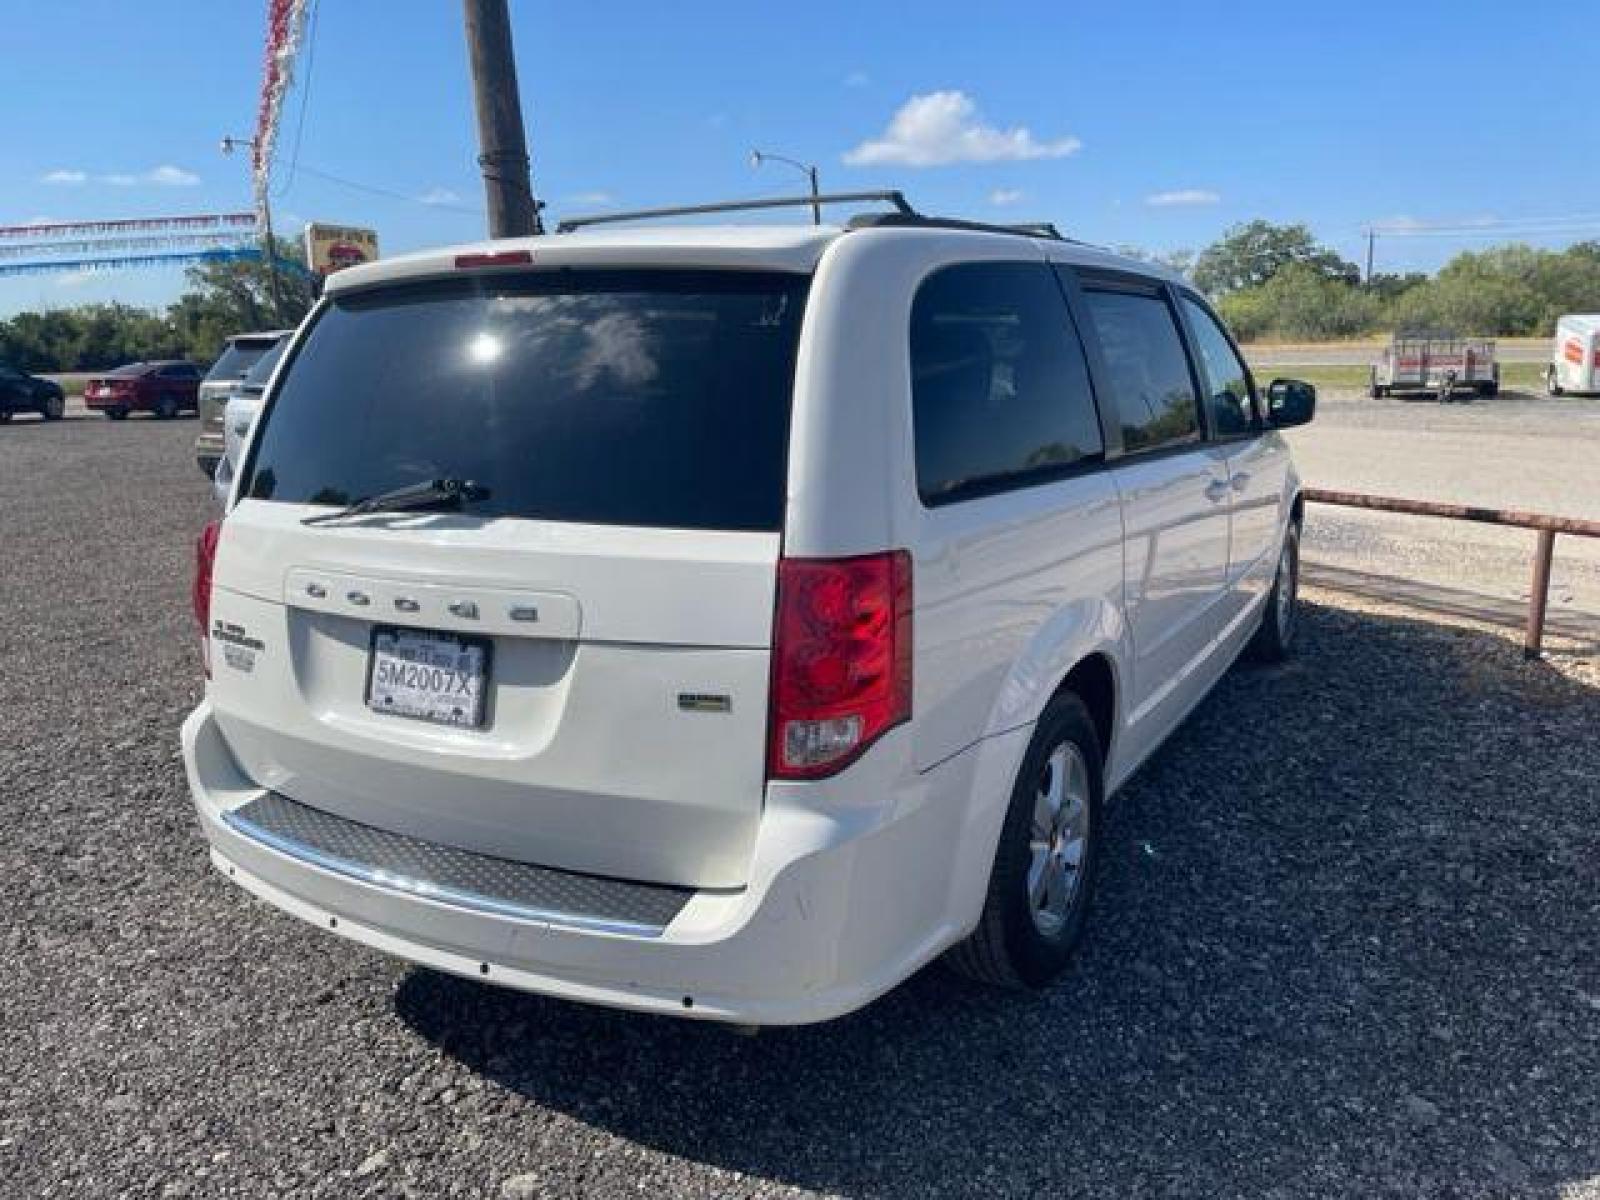 2013 WHITE DODGE GRAND CARAVAN SXT Stow n Go (2C4RDGCGXDR) with an 3.6L engine, Automatic transmission - www.discountautoscibolo.com TEXT QUESTIONS TO 210-900-3118 35 MONTHLY PAYMENTS OF $295 WITH $1895 DOWN AND FINAL ODD PAYMENT OF $273.90 W/FIRST PAYMENT DUE 30 DAYS FROM DATE OF SALE. FEATURES: STOW-N-GO,POWER SLIDING DOORS, 3RD ROW ** NO WARRANTY, SOLD AS IS ** 36 MO'S TERM - Photo #2